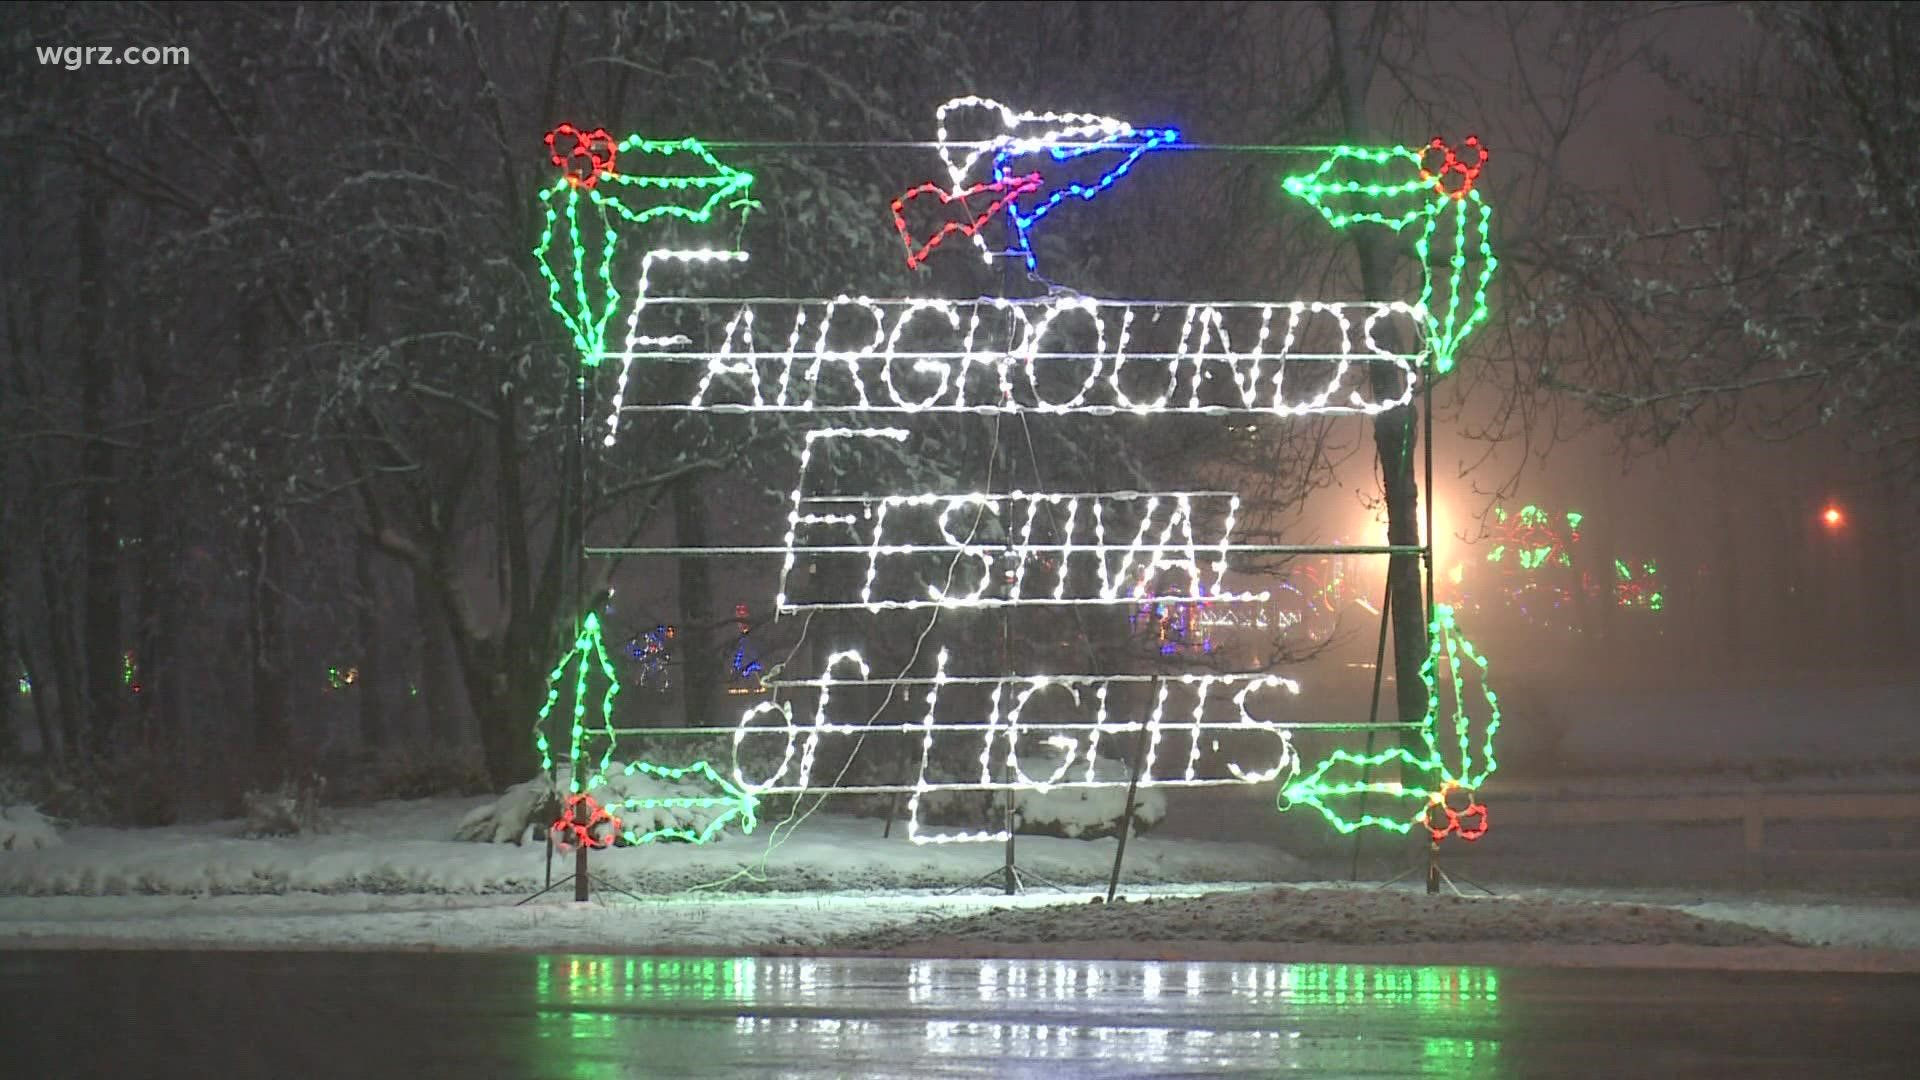 The Hamburg Fairgrounds is getting ready to put on the annual festival of lights drive thru.